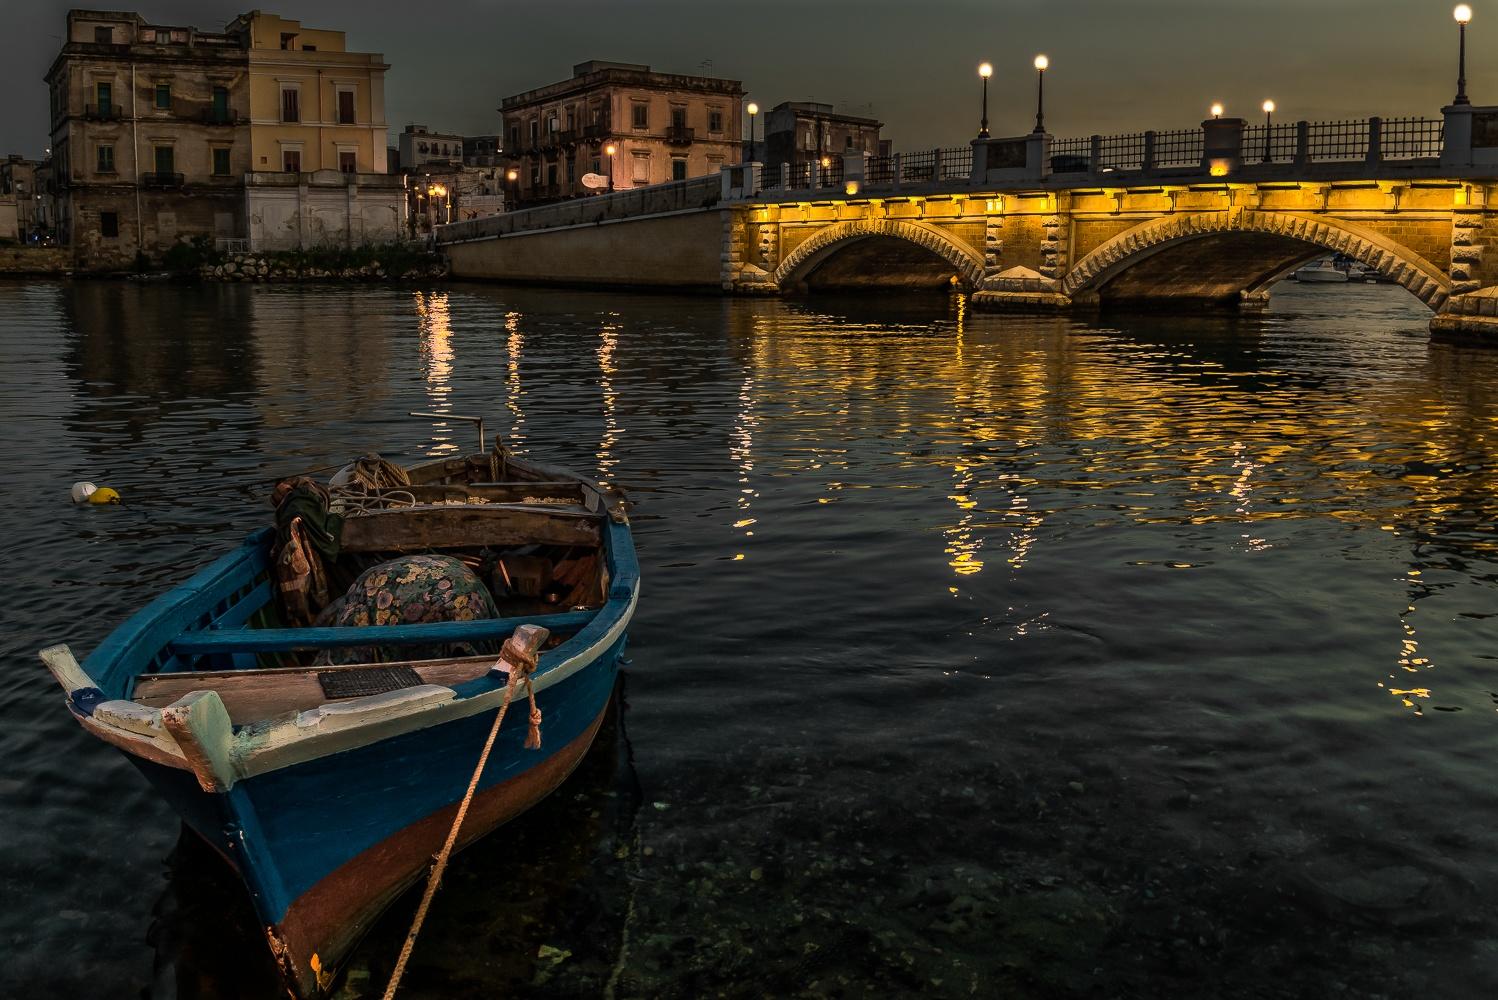 The old Taranto evening view.